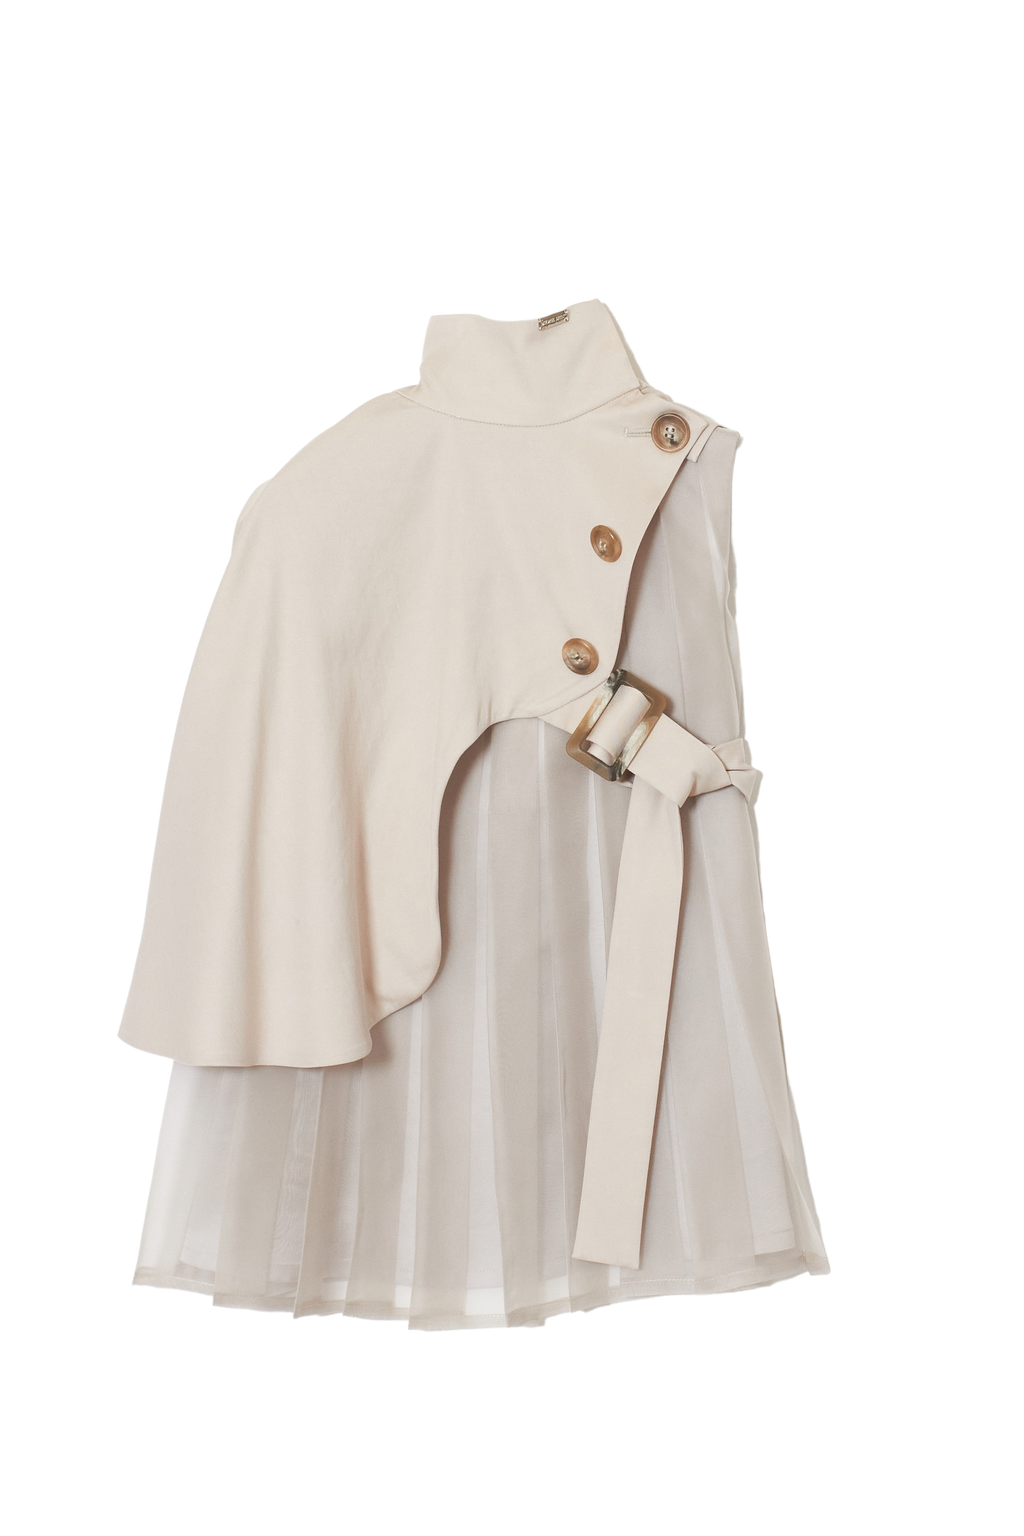 Beige Trench Cape  Layered Tops